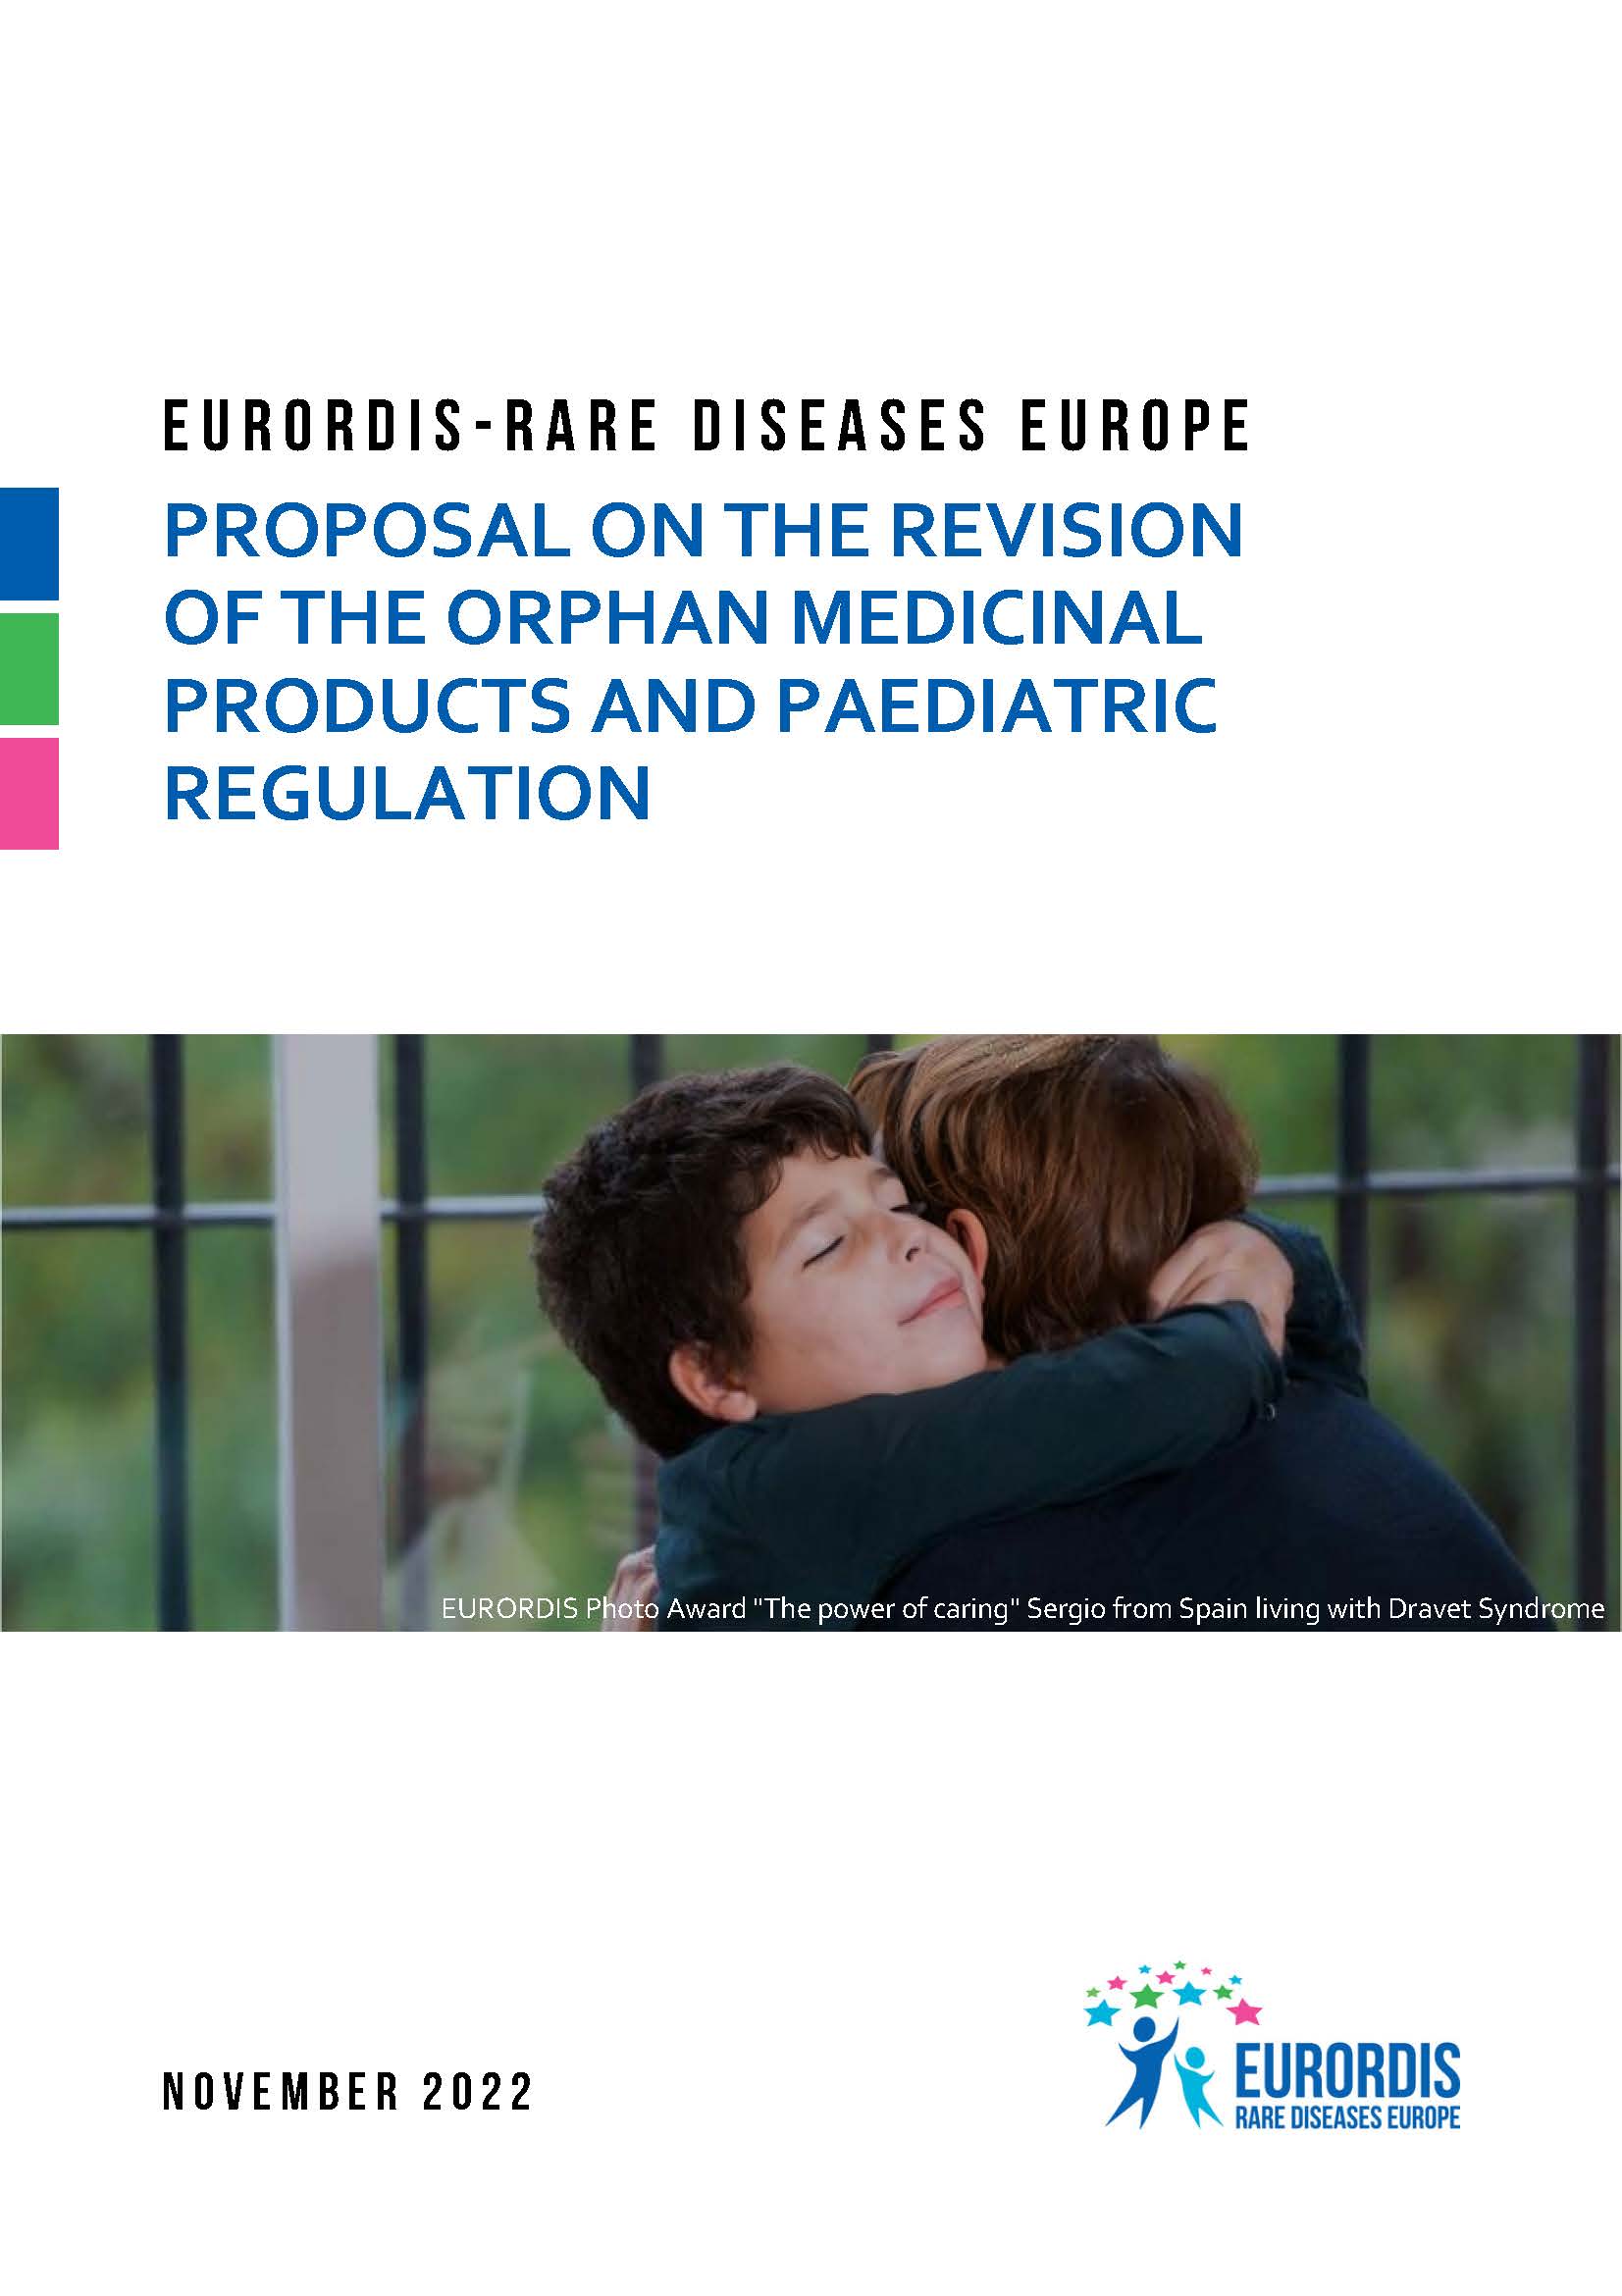 EURORDIS‘ Proposal on the Revision of the Orphan Medicinal Products and Paediatric Regulation